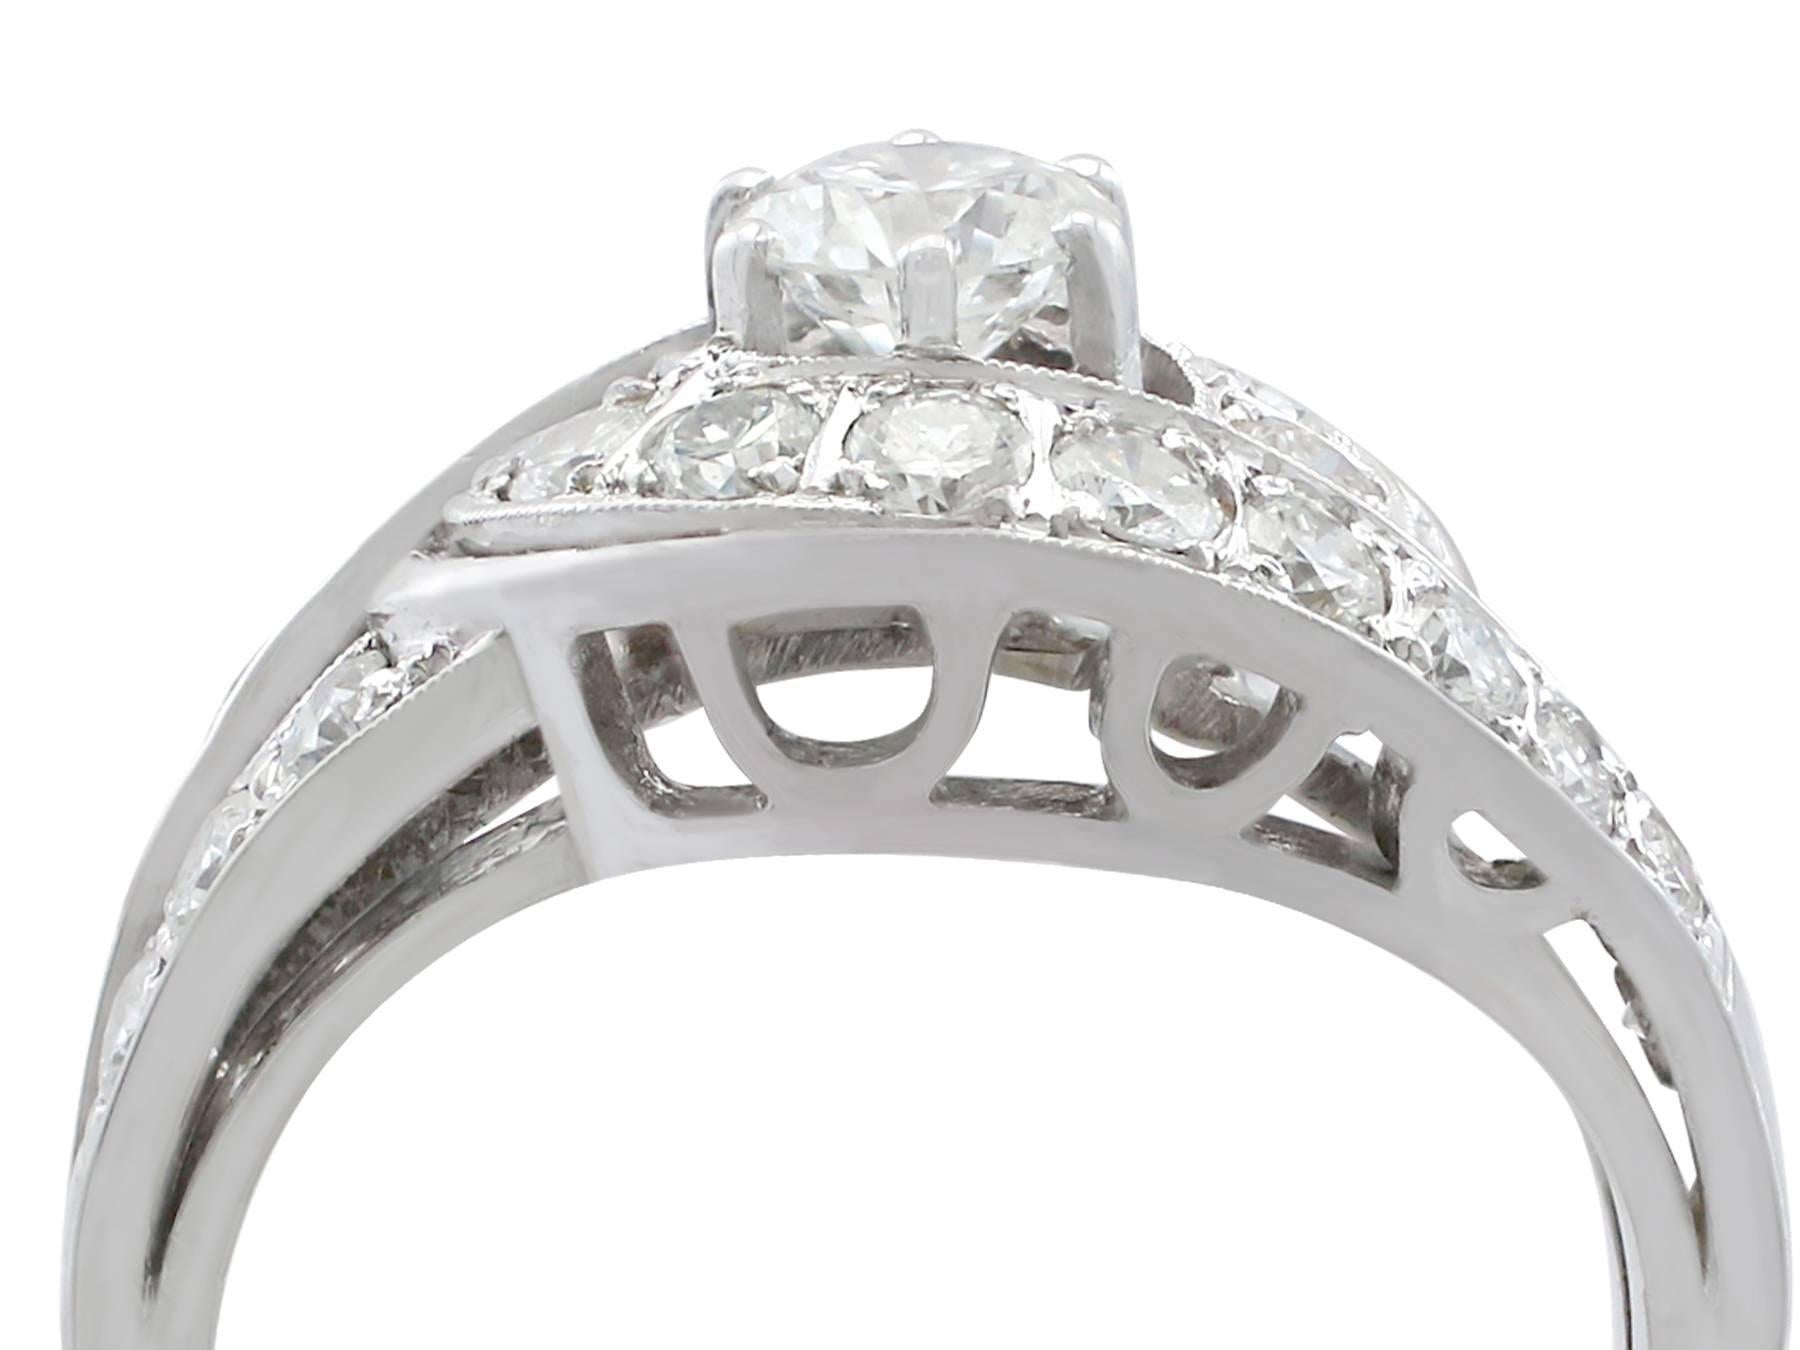 An impressive vintage German 1.88 Ct diamond and 18k white gold twist style cocktail ring; part of our diverse diamond jewelry and estate jewelry collections.

This fine and impressive vintage diamond cocktail ring has been crafted in 14 Ct white